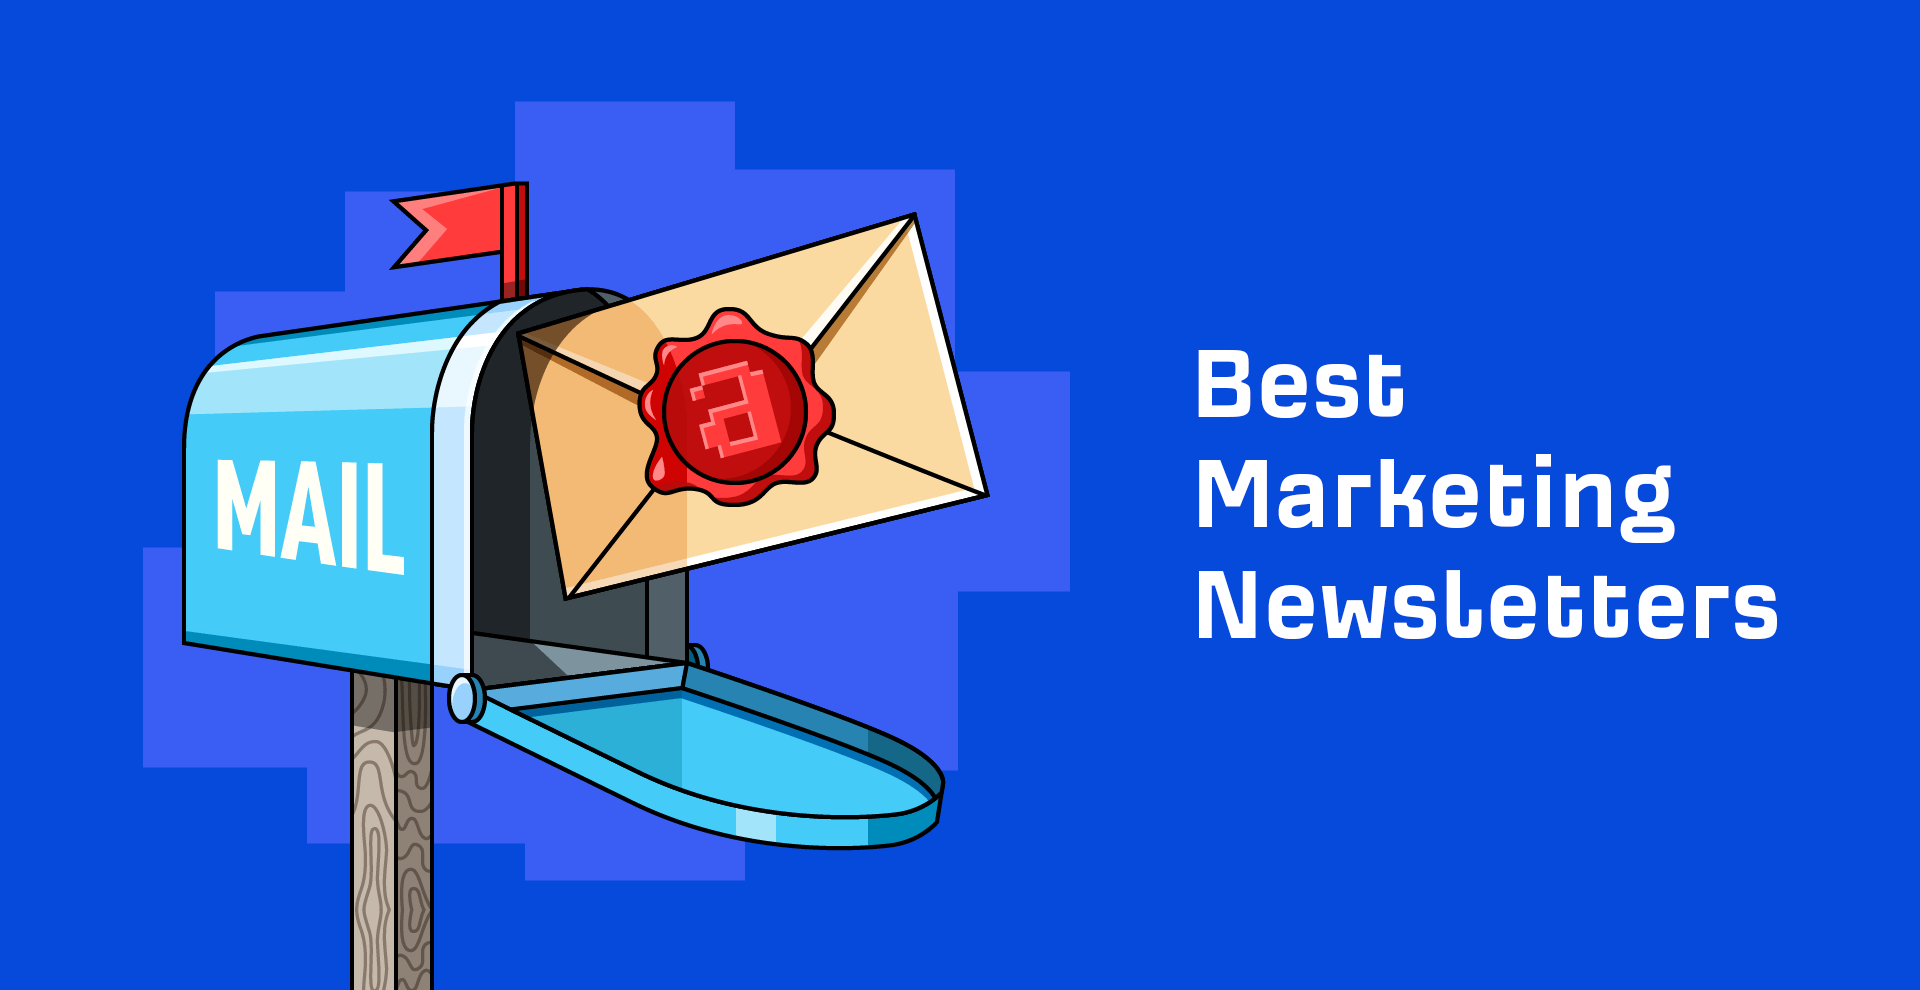 7 Best Marketing Newsletters (Most Voted For)